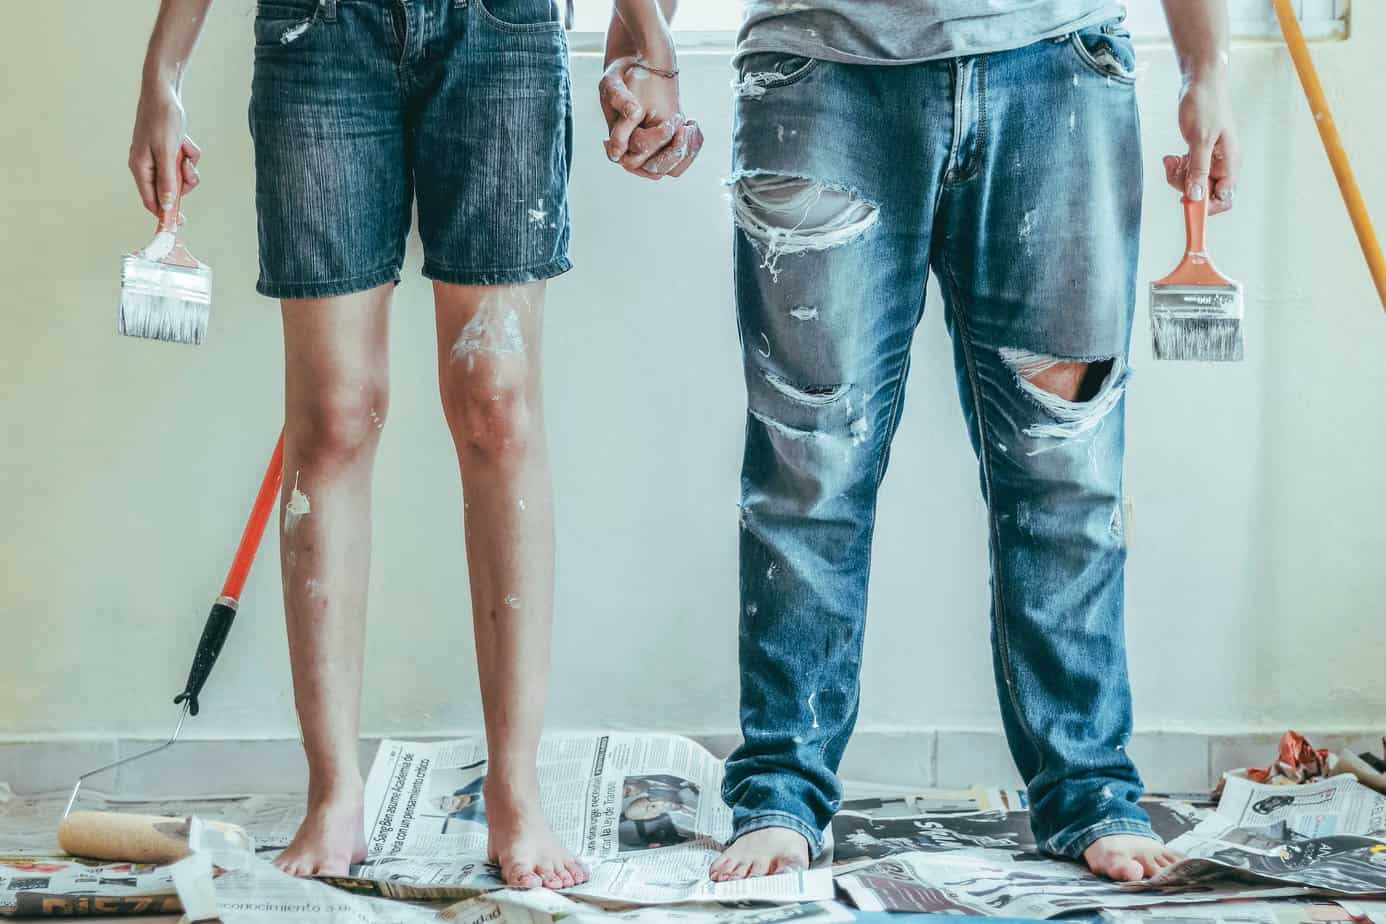 Renovation Mistakes Homeowners Should Avoid